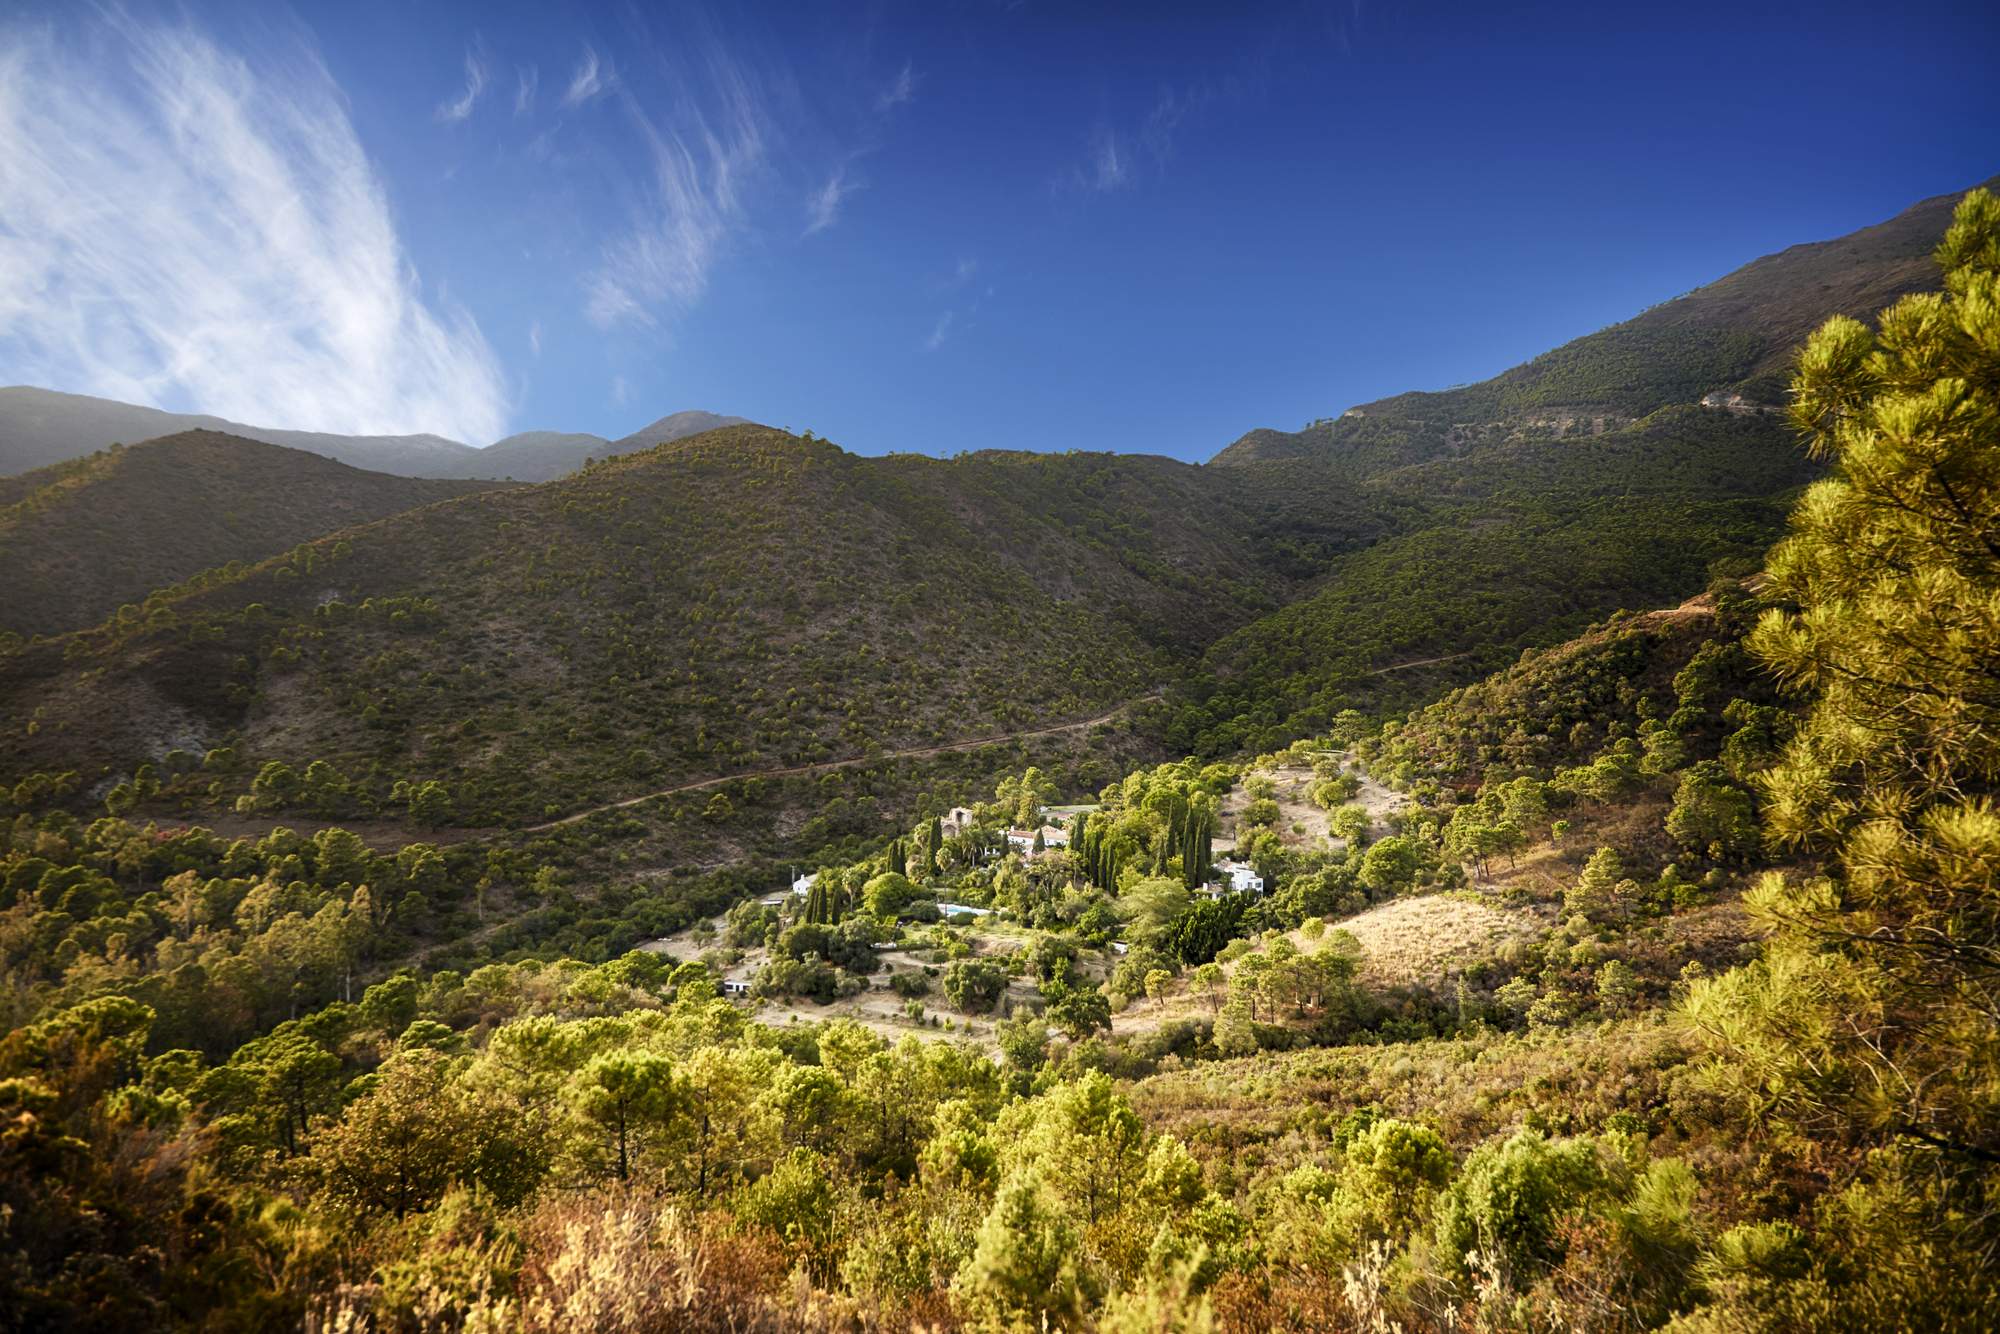 View of Tramores Estate, Andalucia